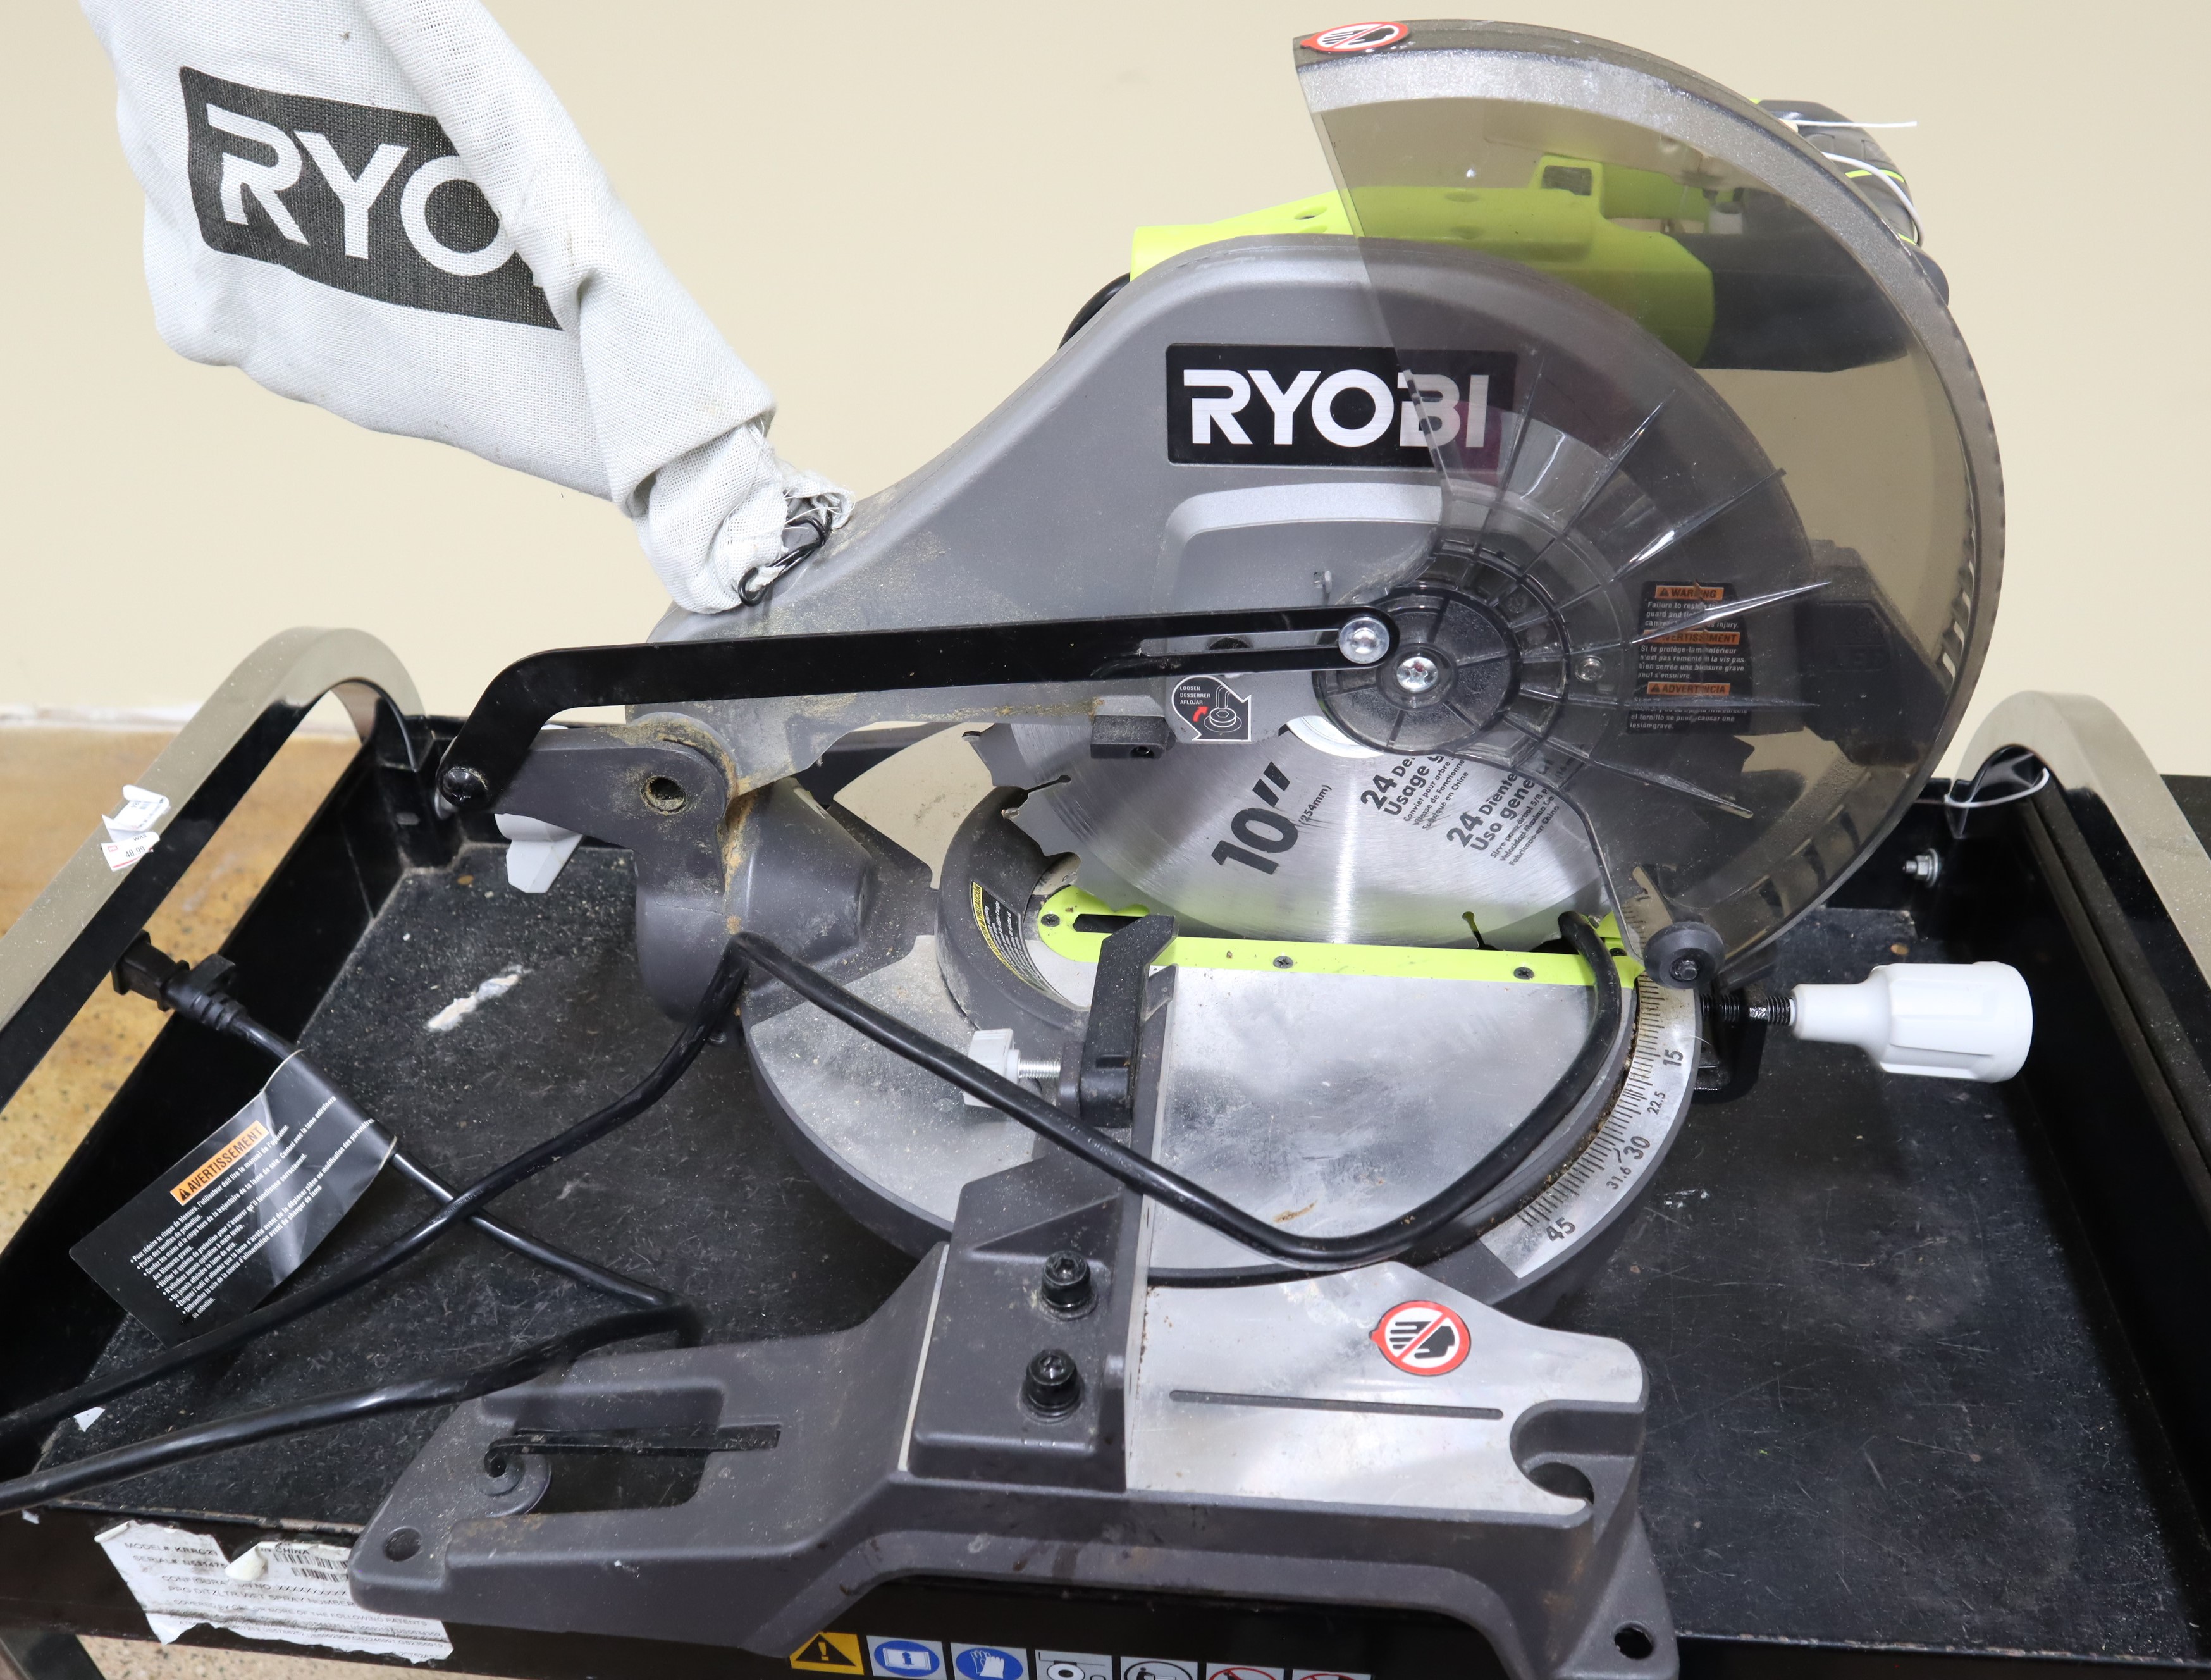 Ryobi TS1346 14 Amp Corded 10 in. Compound Miter Saw Local In Store Pickup  Only